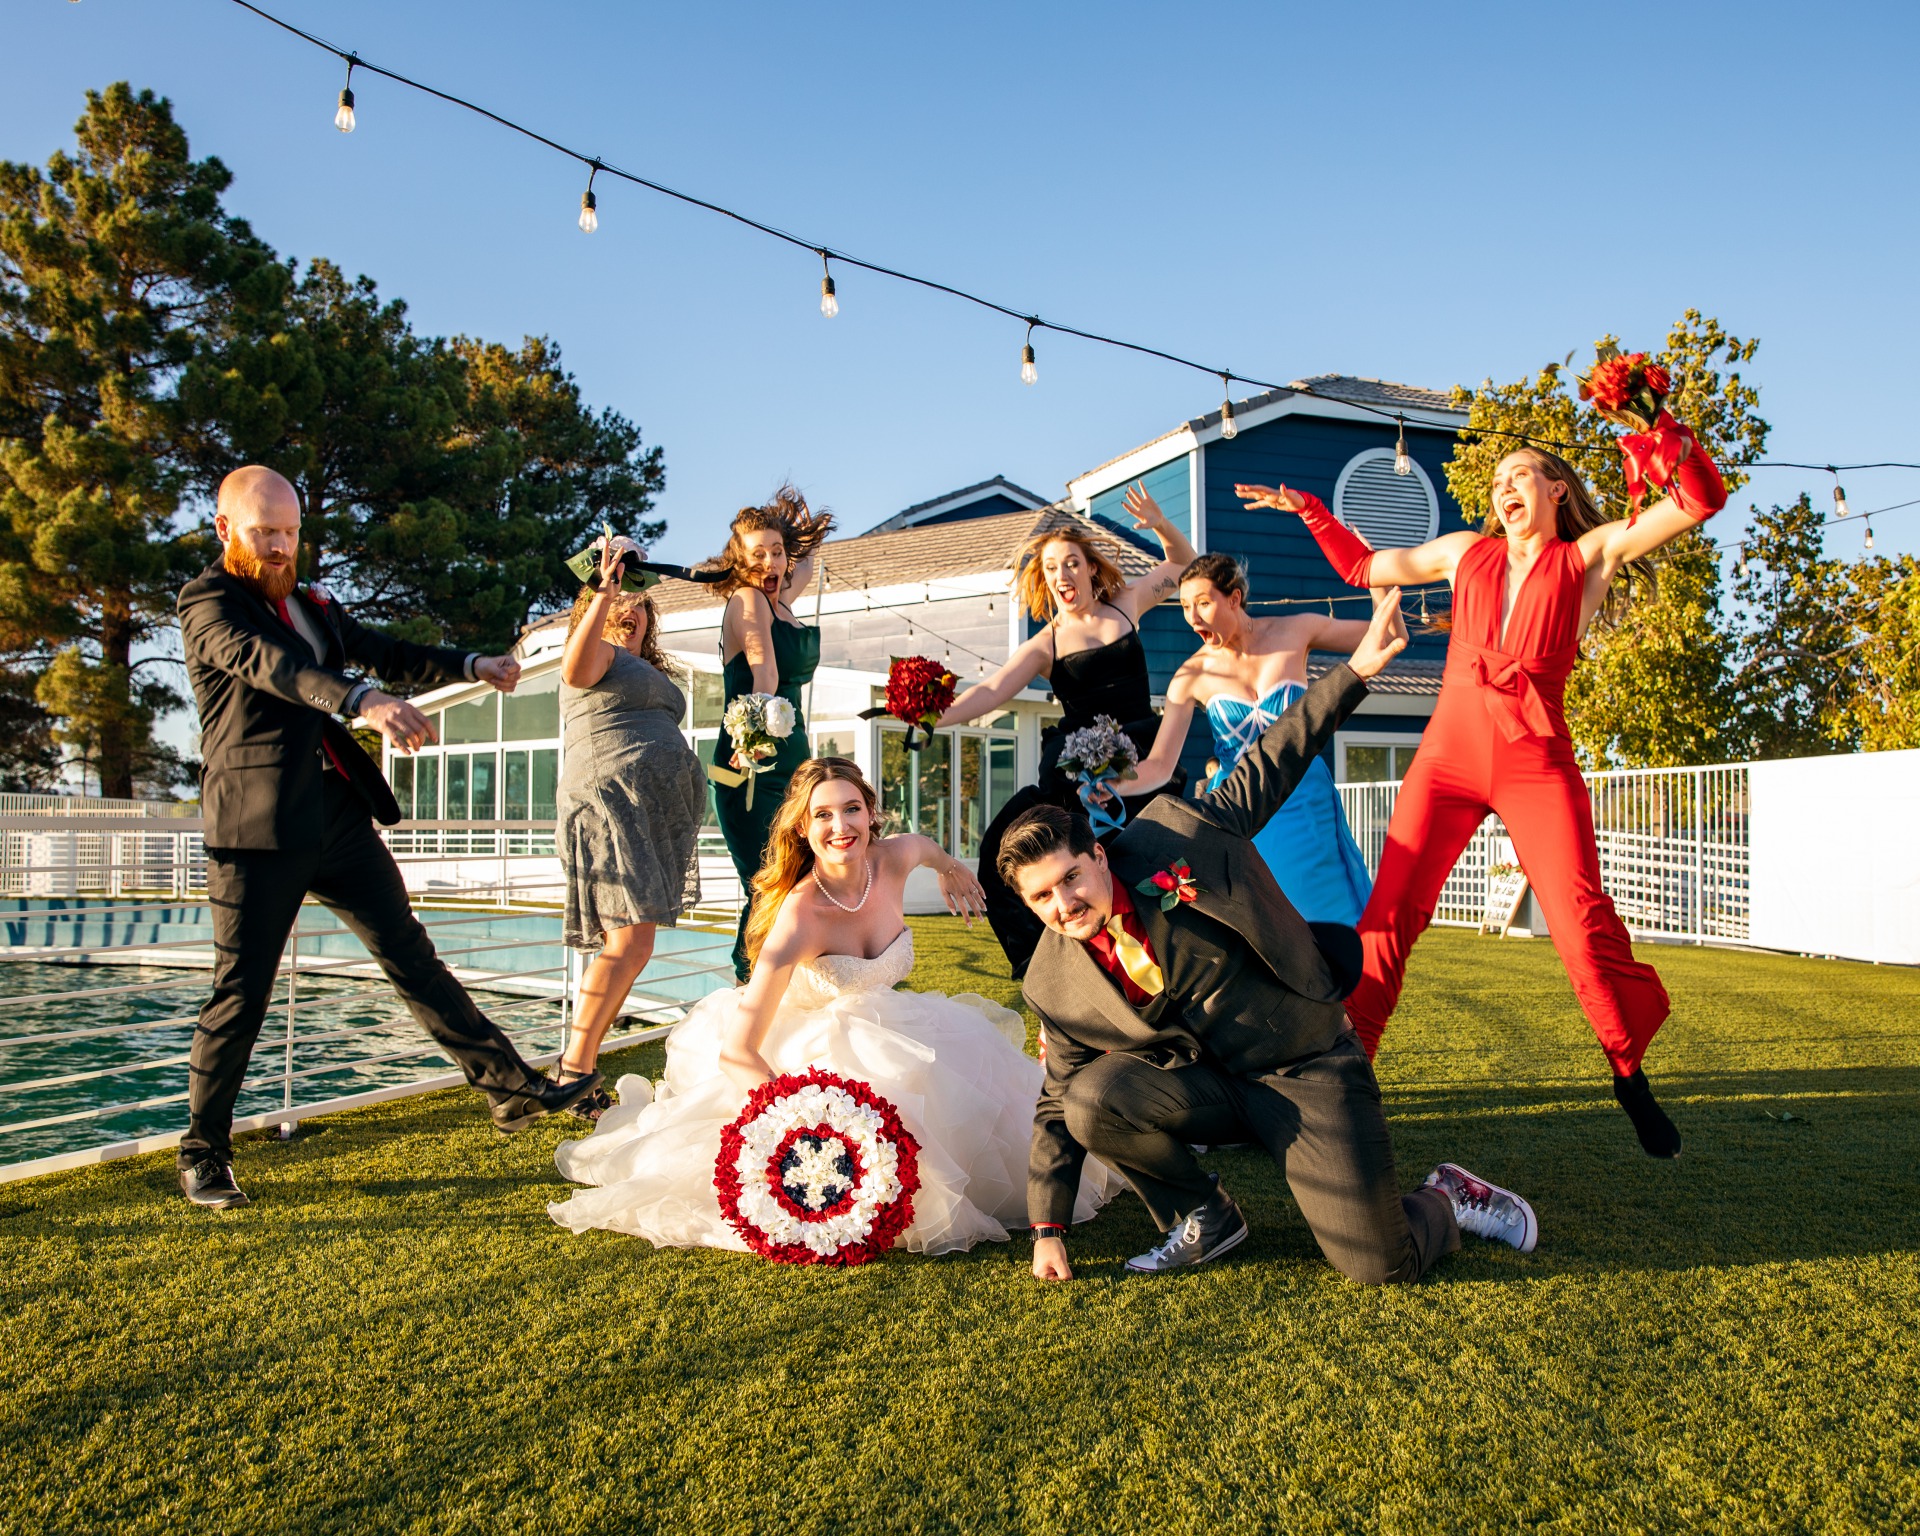 Couple has unique comic book wedding inspiration theme. Bride with captain america bouquet poses with goom and bridal party with Avengers inspired outfits.